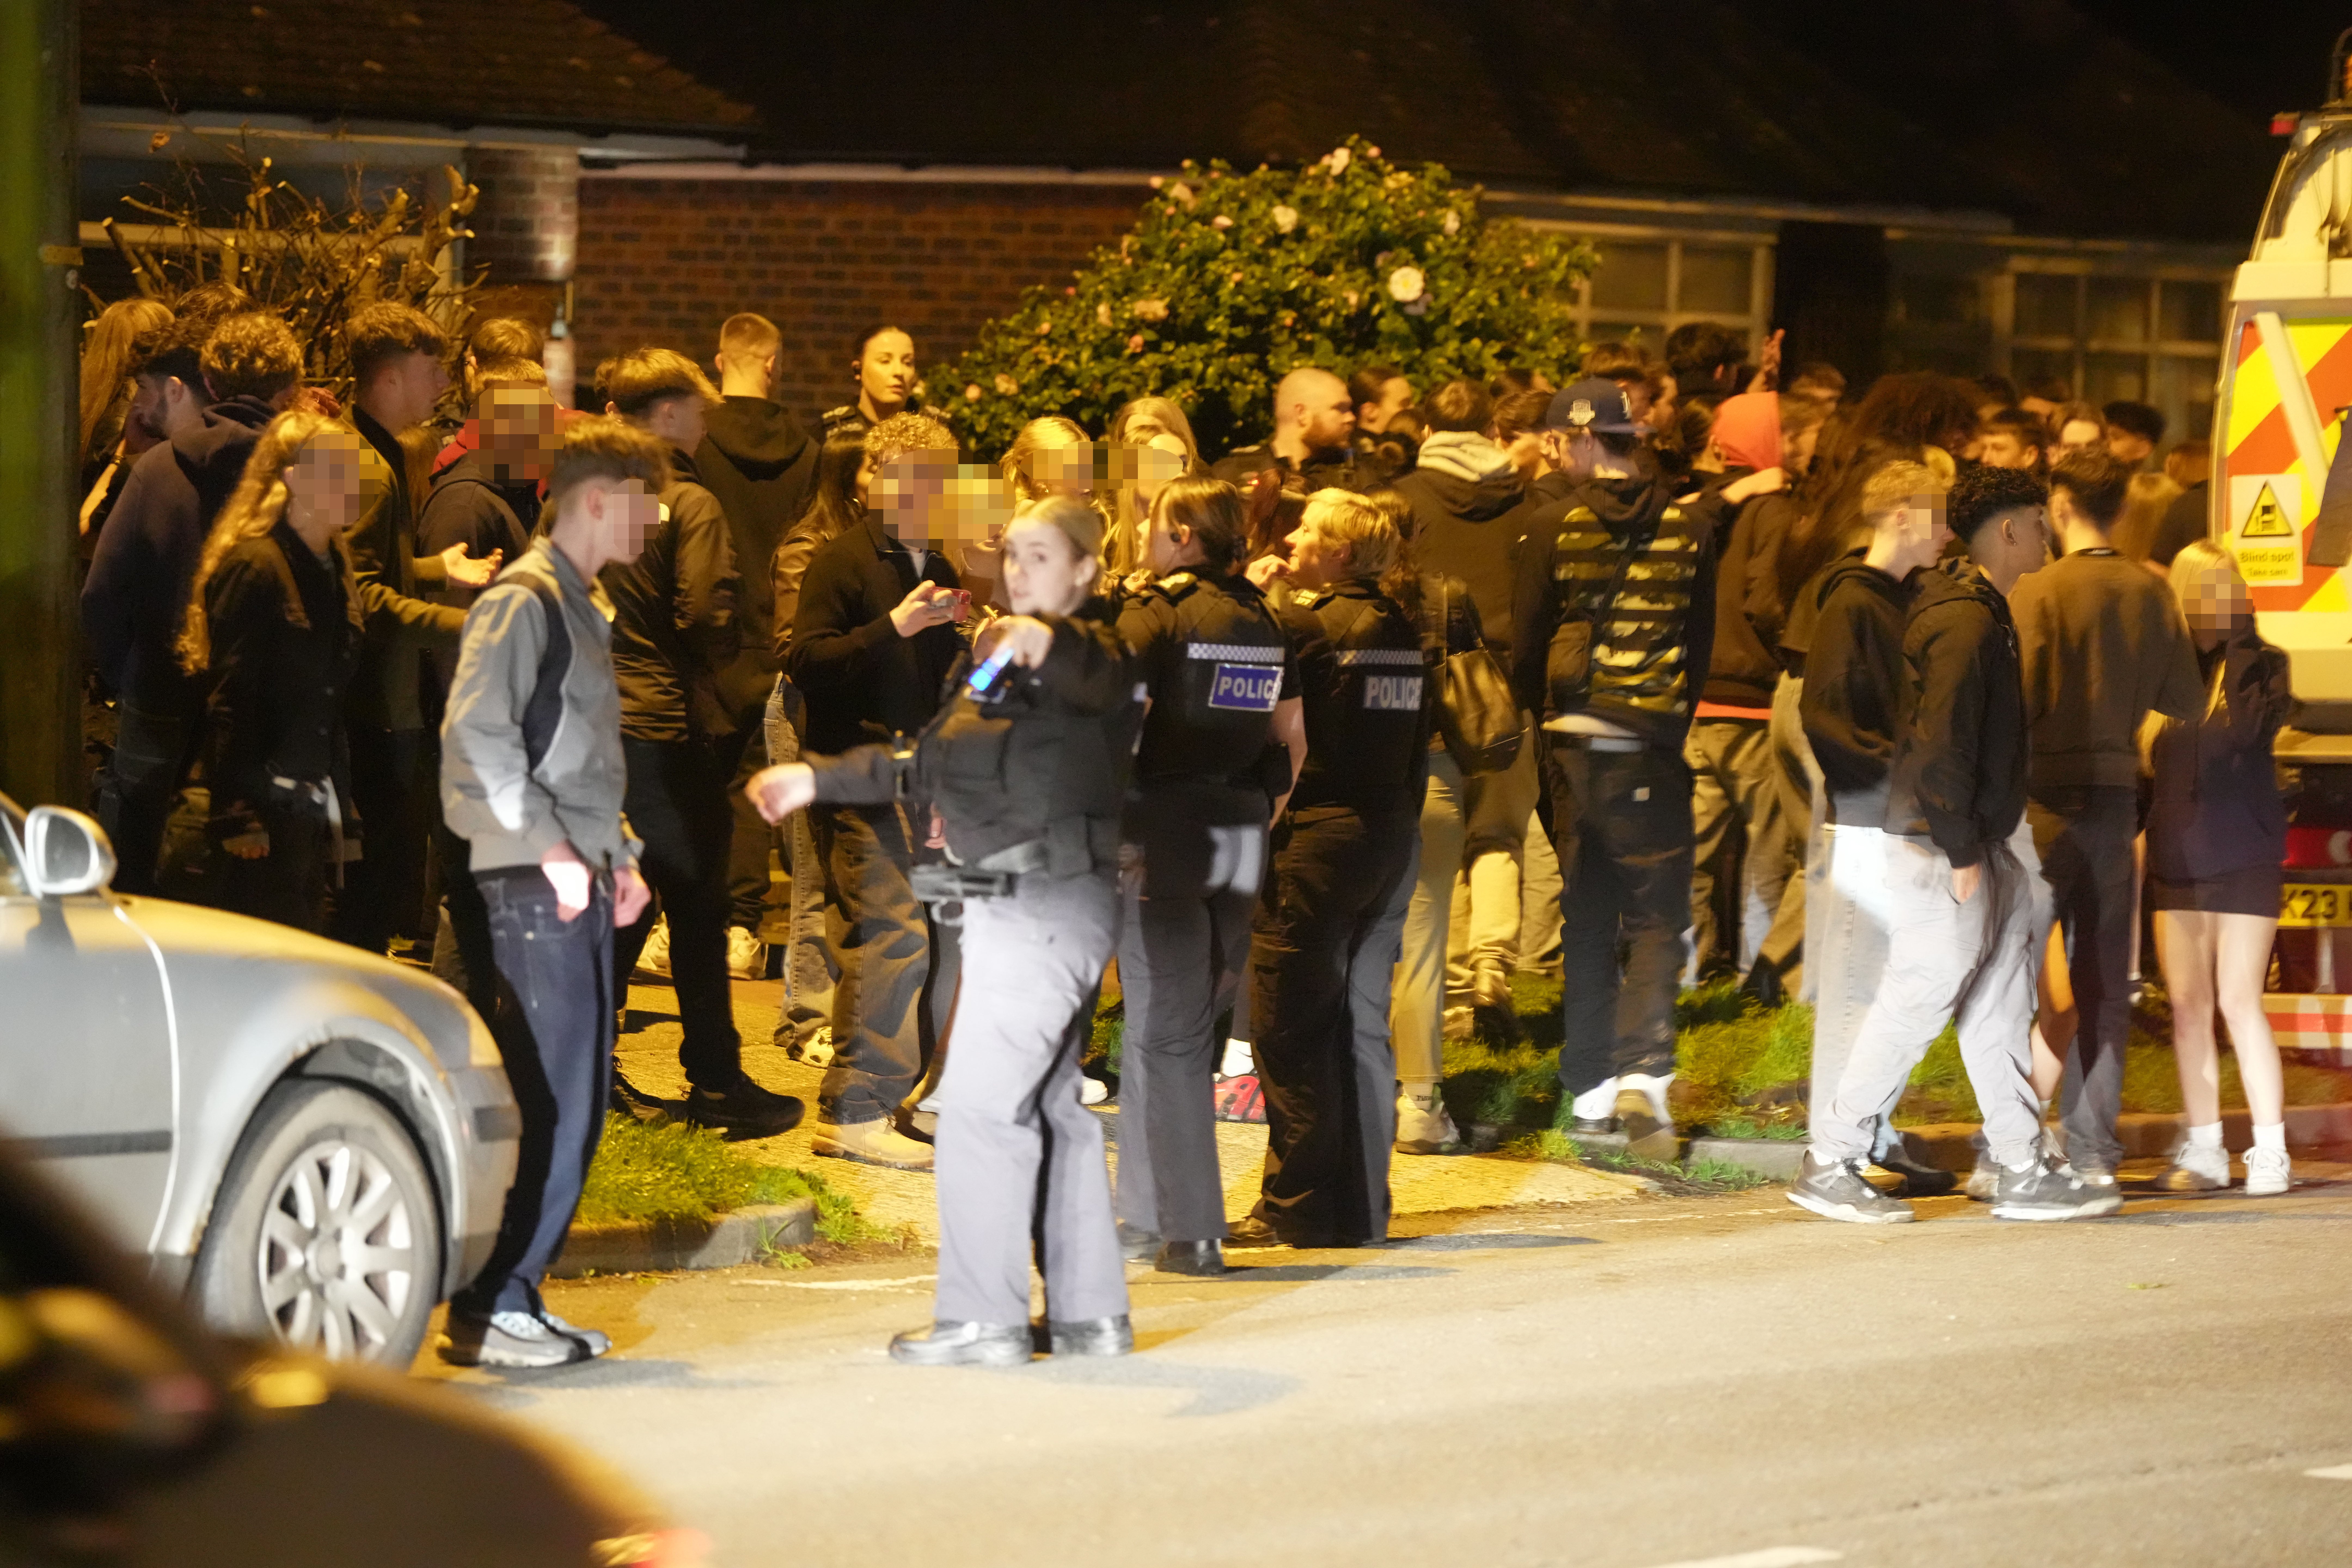 Locals complained of cars being kicked and punched as the house party in Worthing spiralled out of control